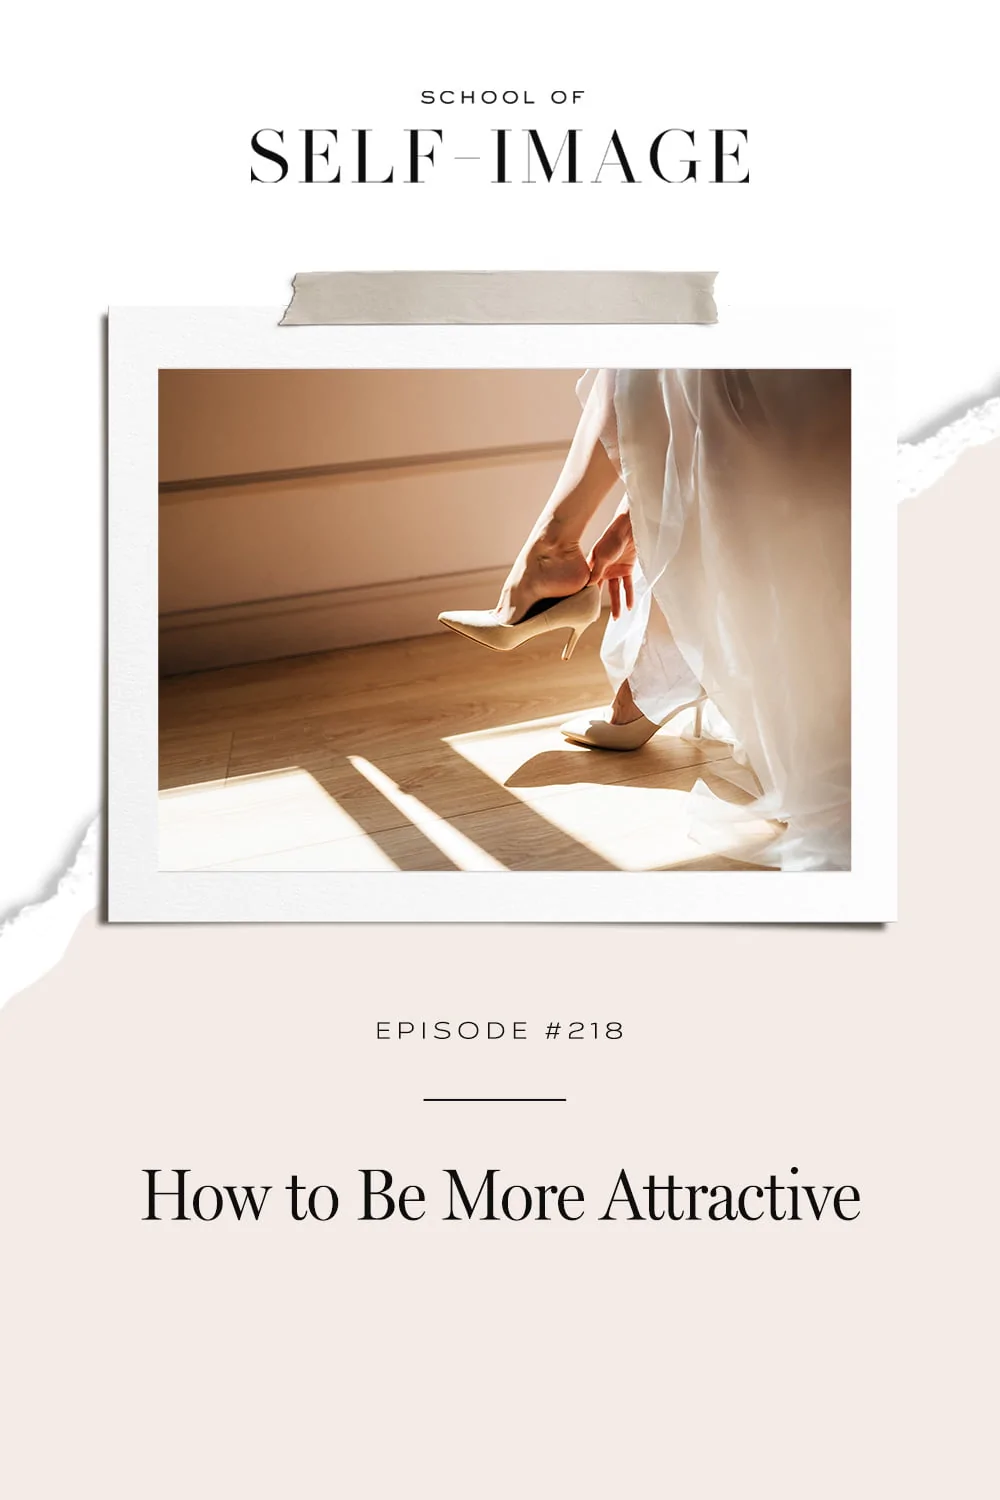 How to actually be more attractive to the type of person you’re trying to attract.